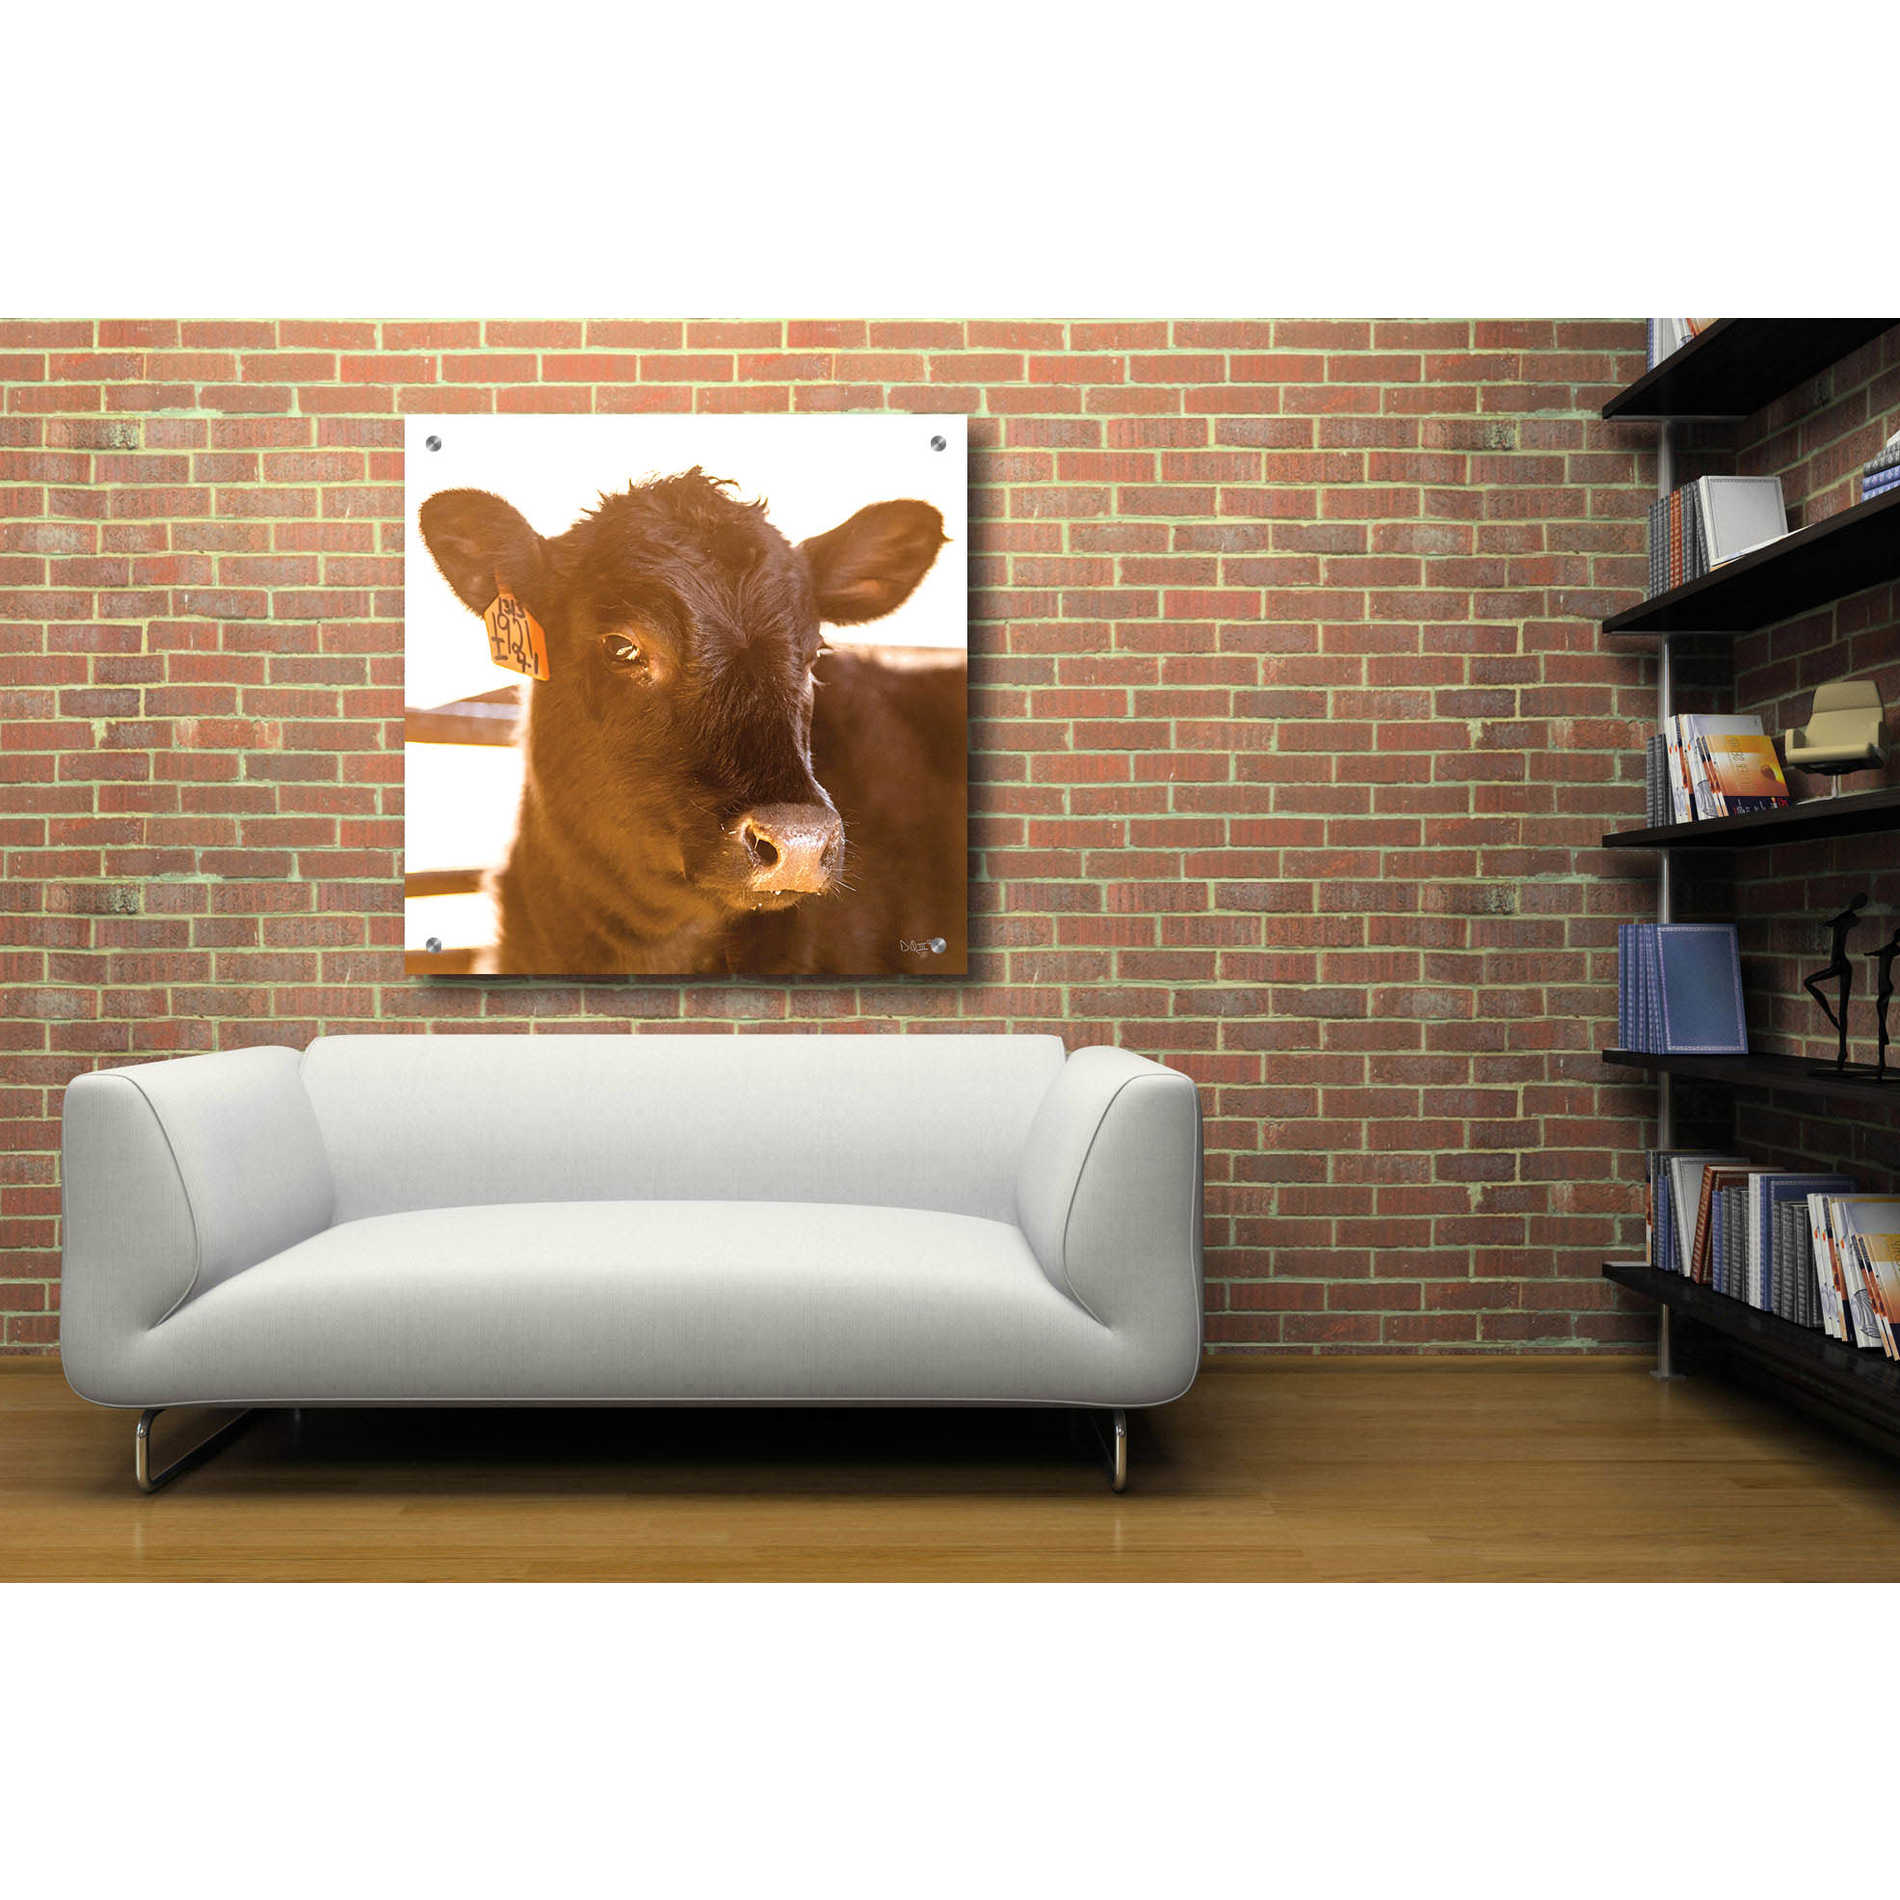 'Baby Cow I' by Donnie Quillen, Acrylic Wall Art,36x36